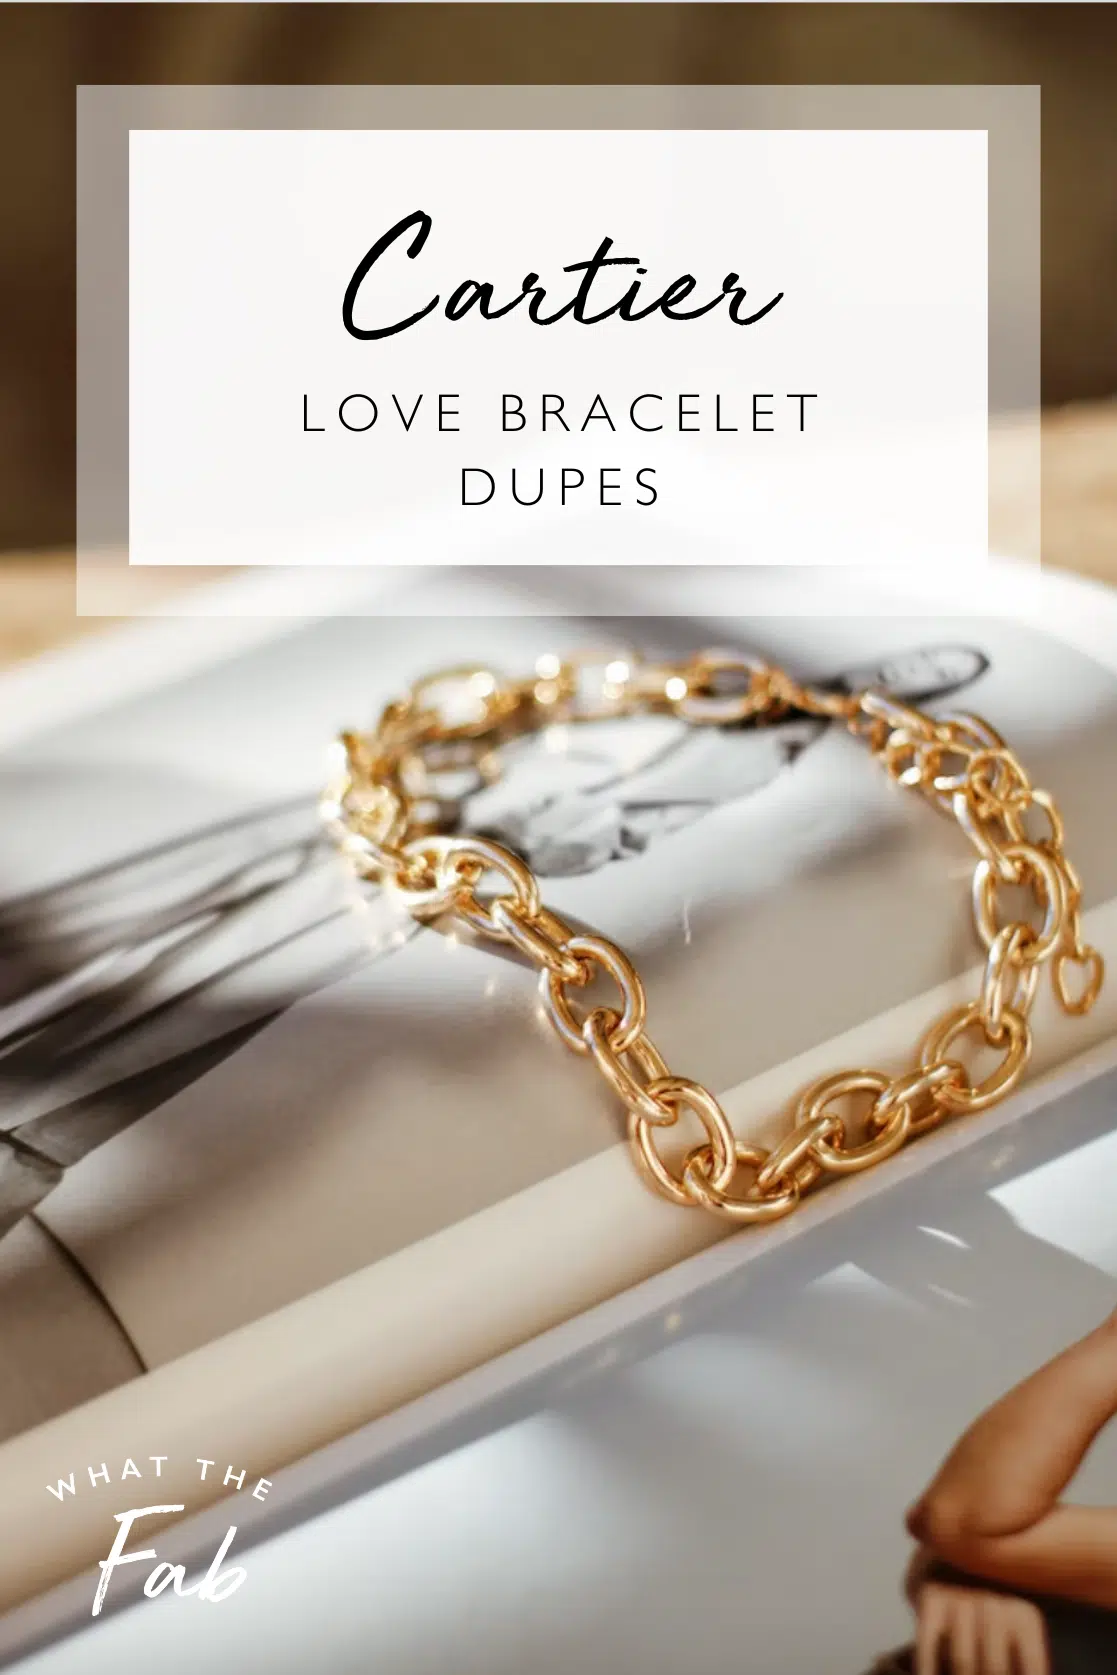 Tiffanys Lock Bangle May Be Its Answer to Cartiers Love Bracelet   National Jeweler